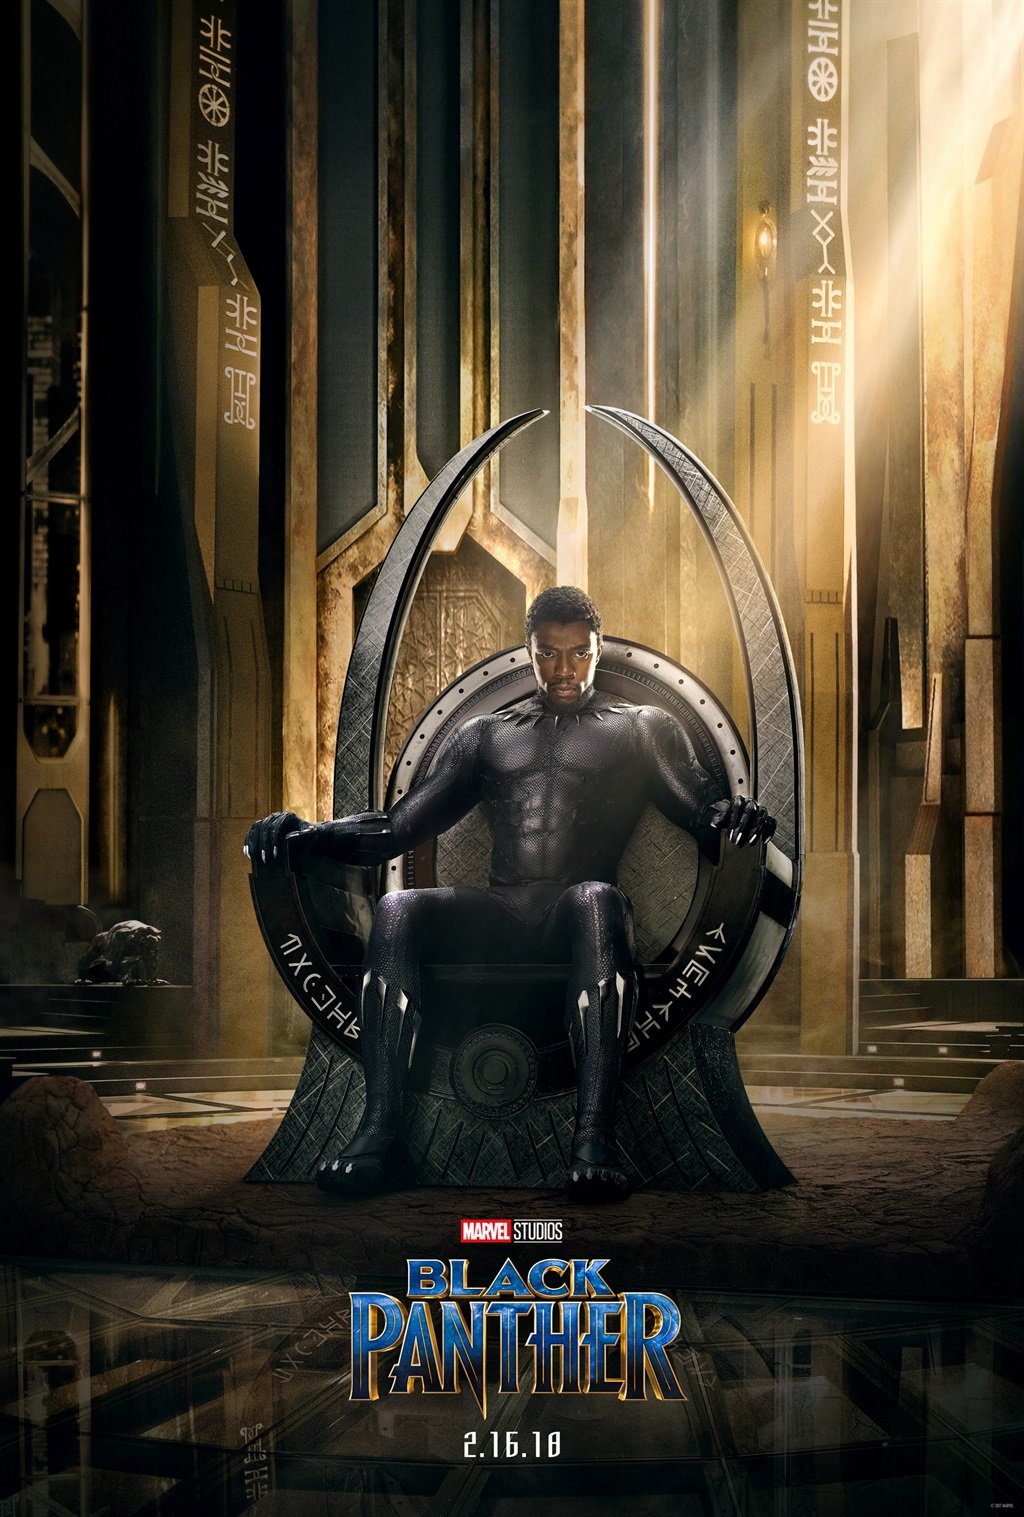 PANTHER POUNCE T’Challa, king of the box office across Africa and beyond.